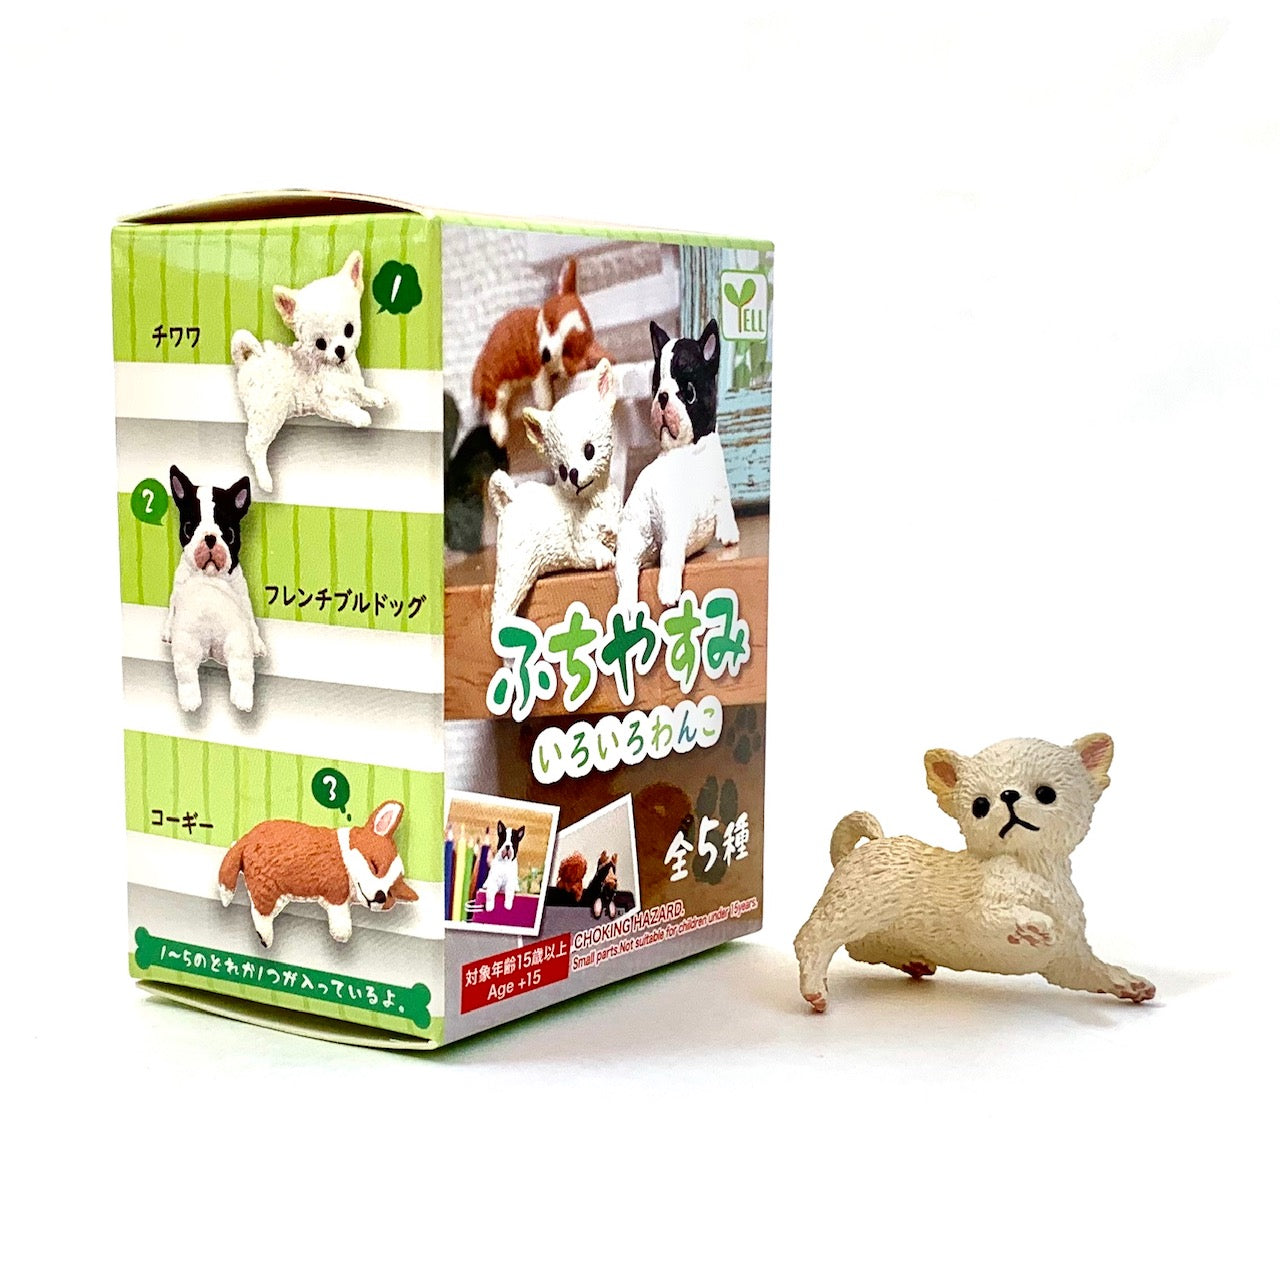 Wholesale Blind Dogs Accessories Toys And Teddies Online 